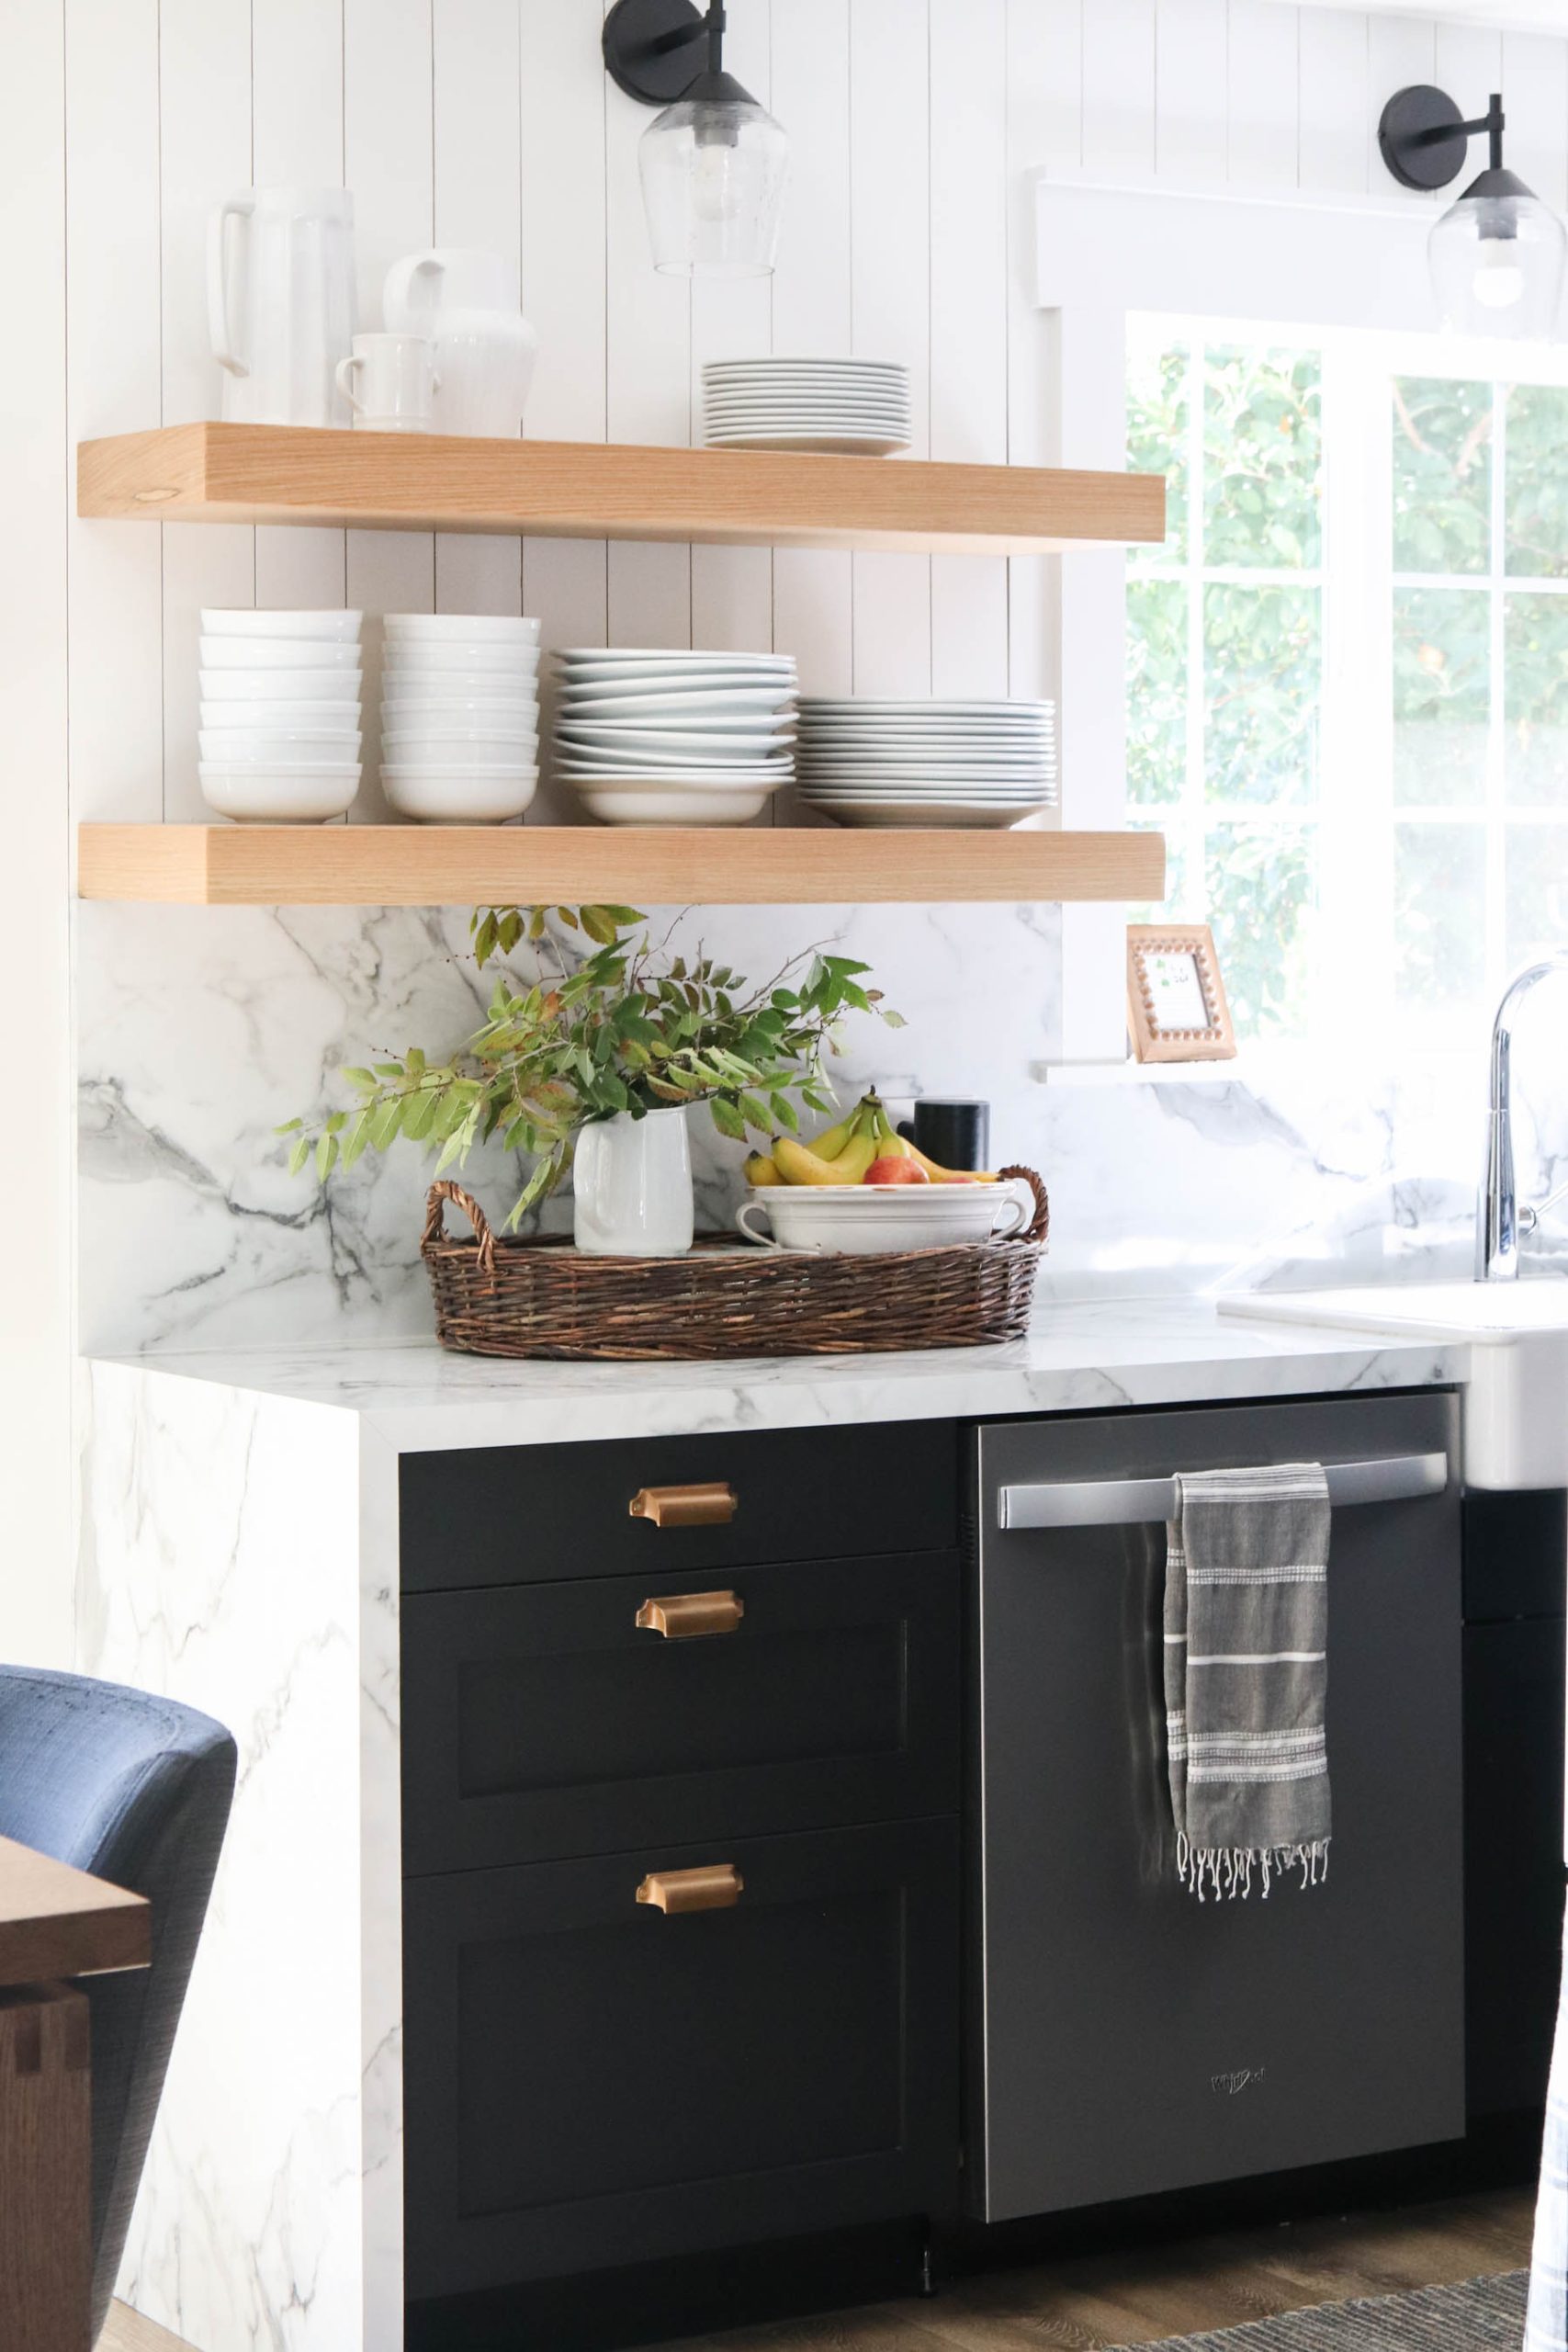 Why I Love To Add A Basket To My Kitchen Countertop